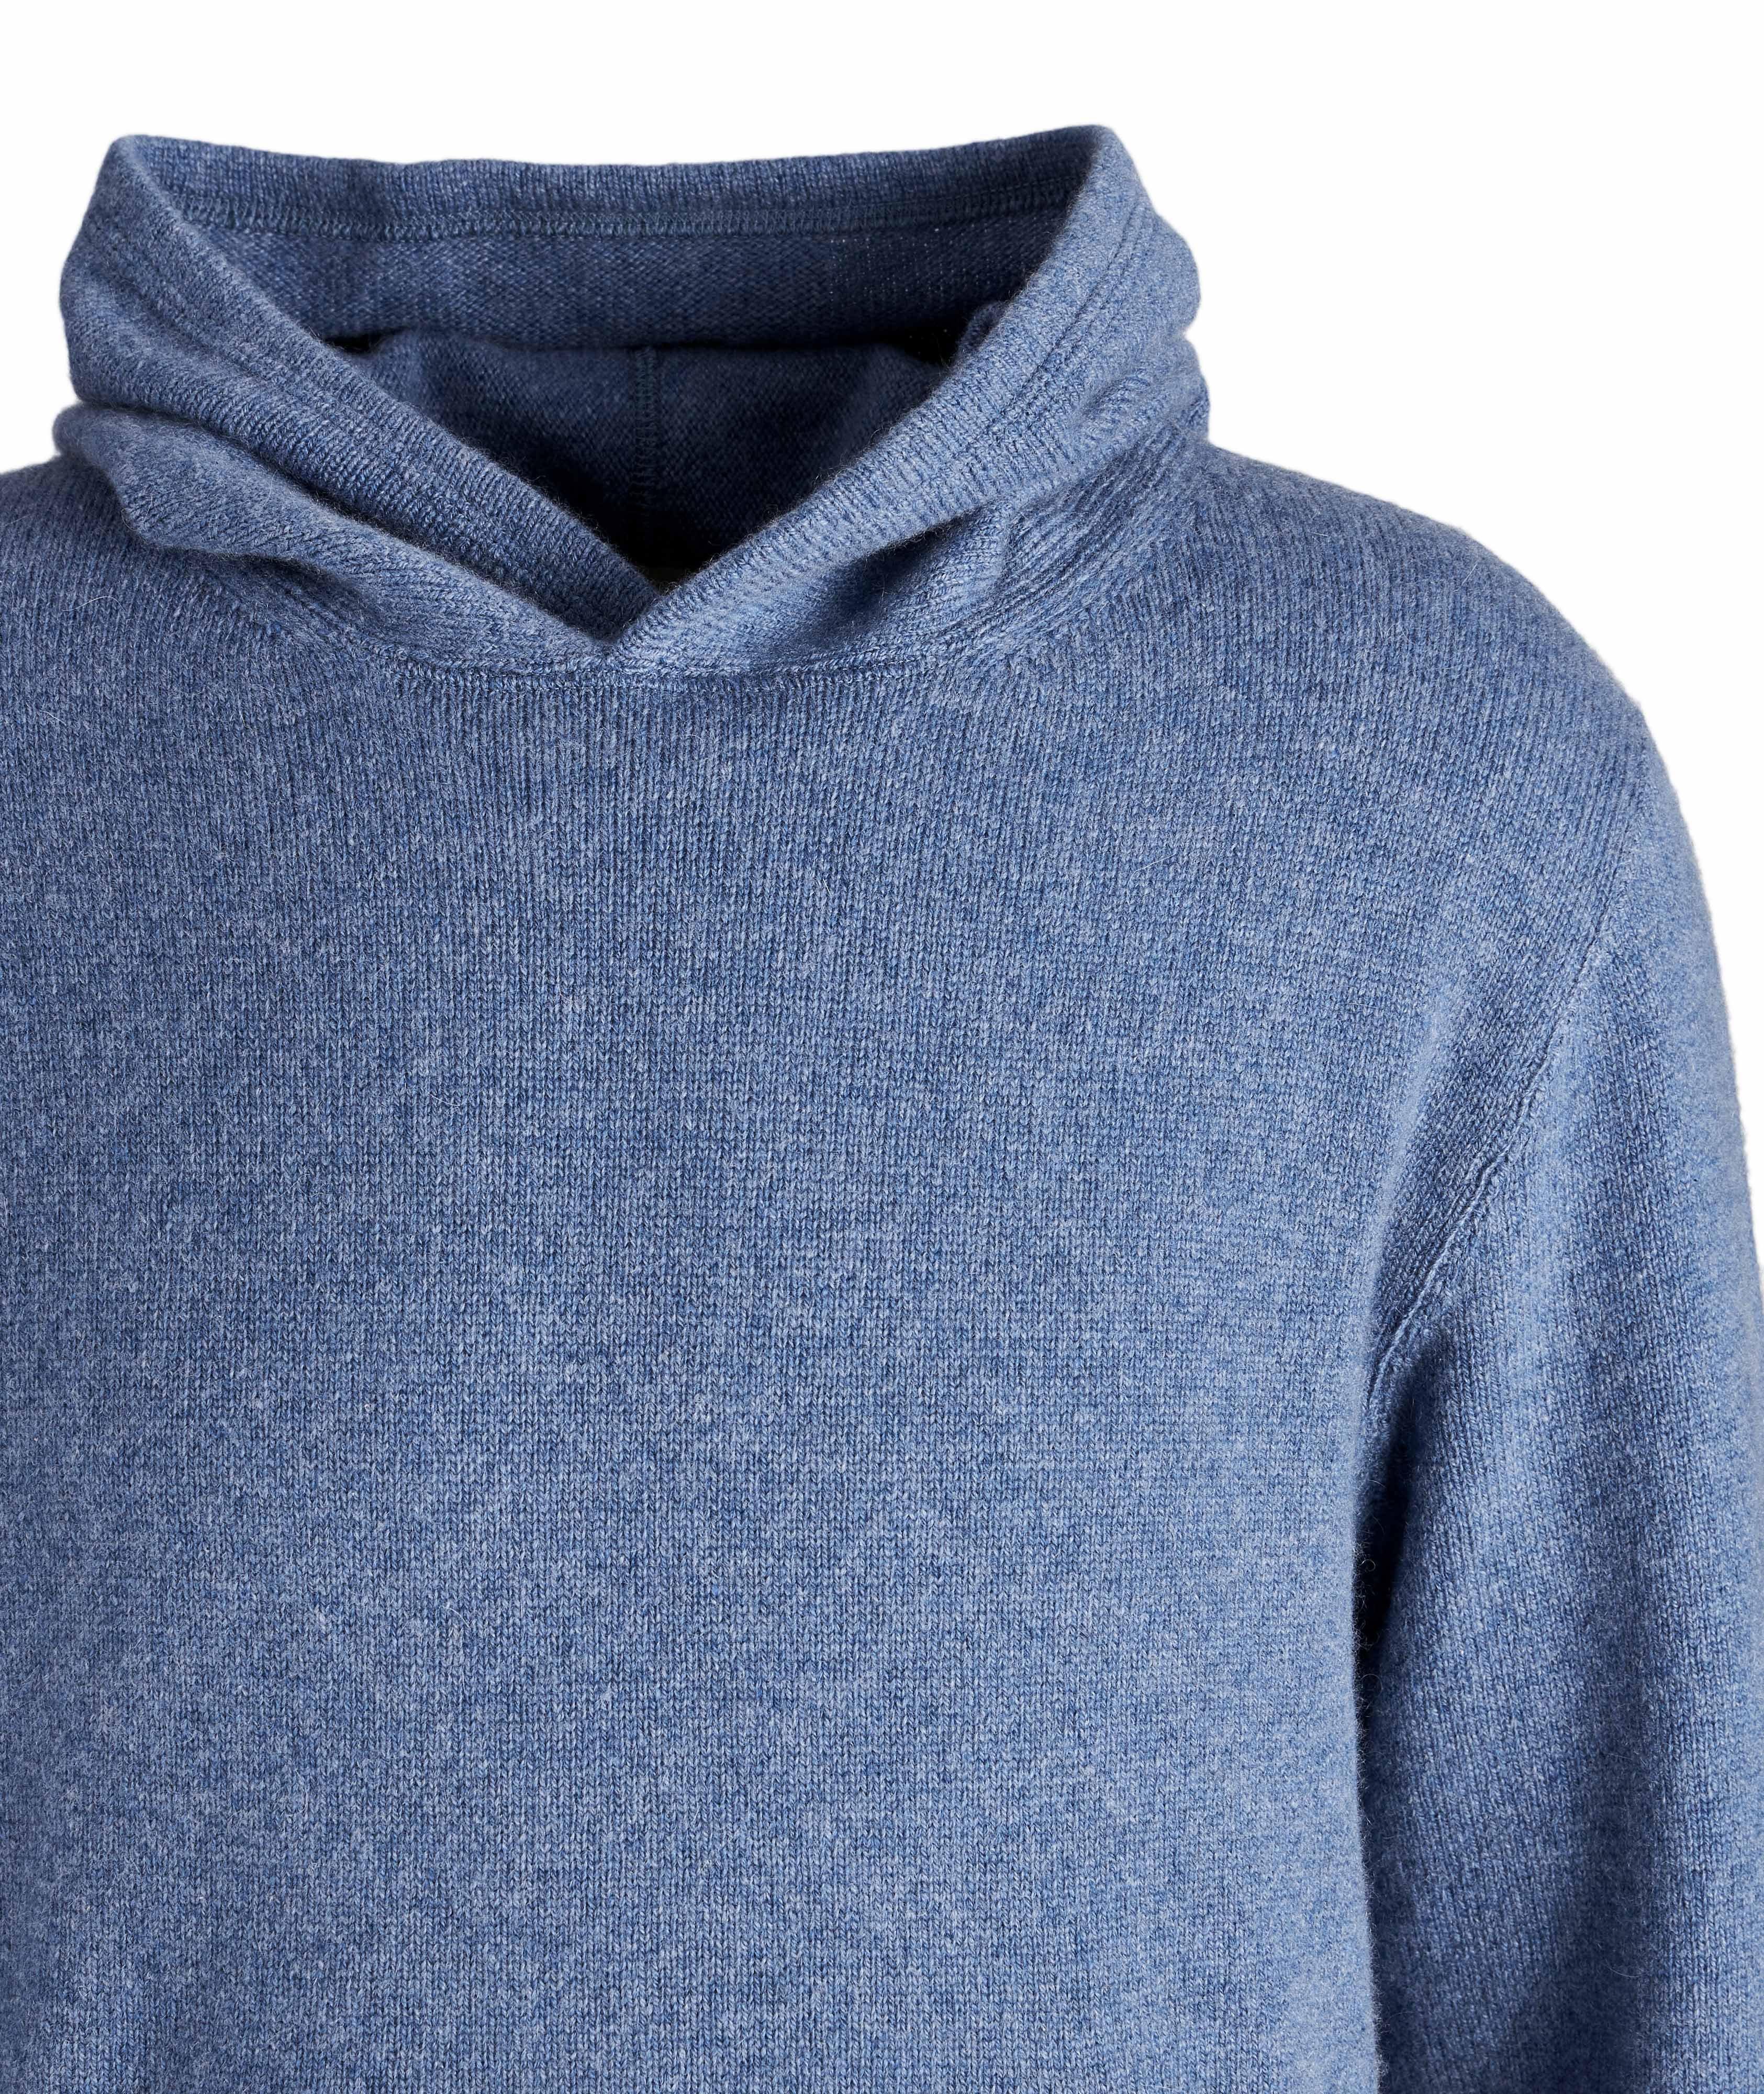 Cashmere Hoodie image 2